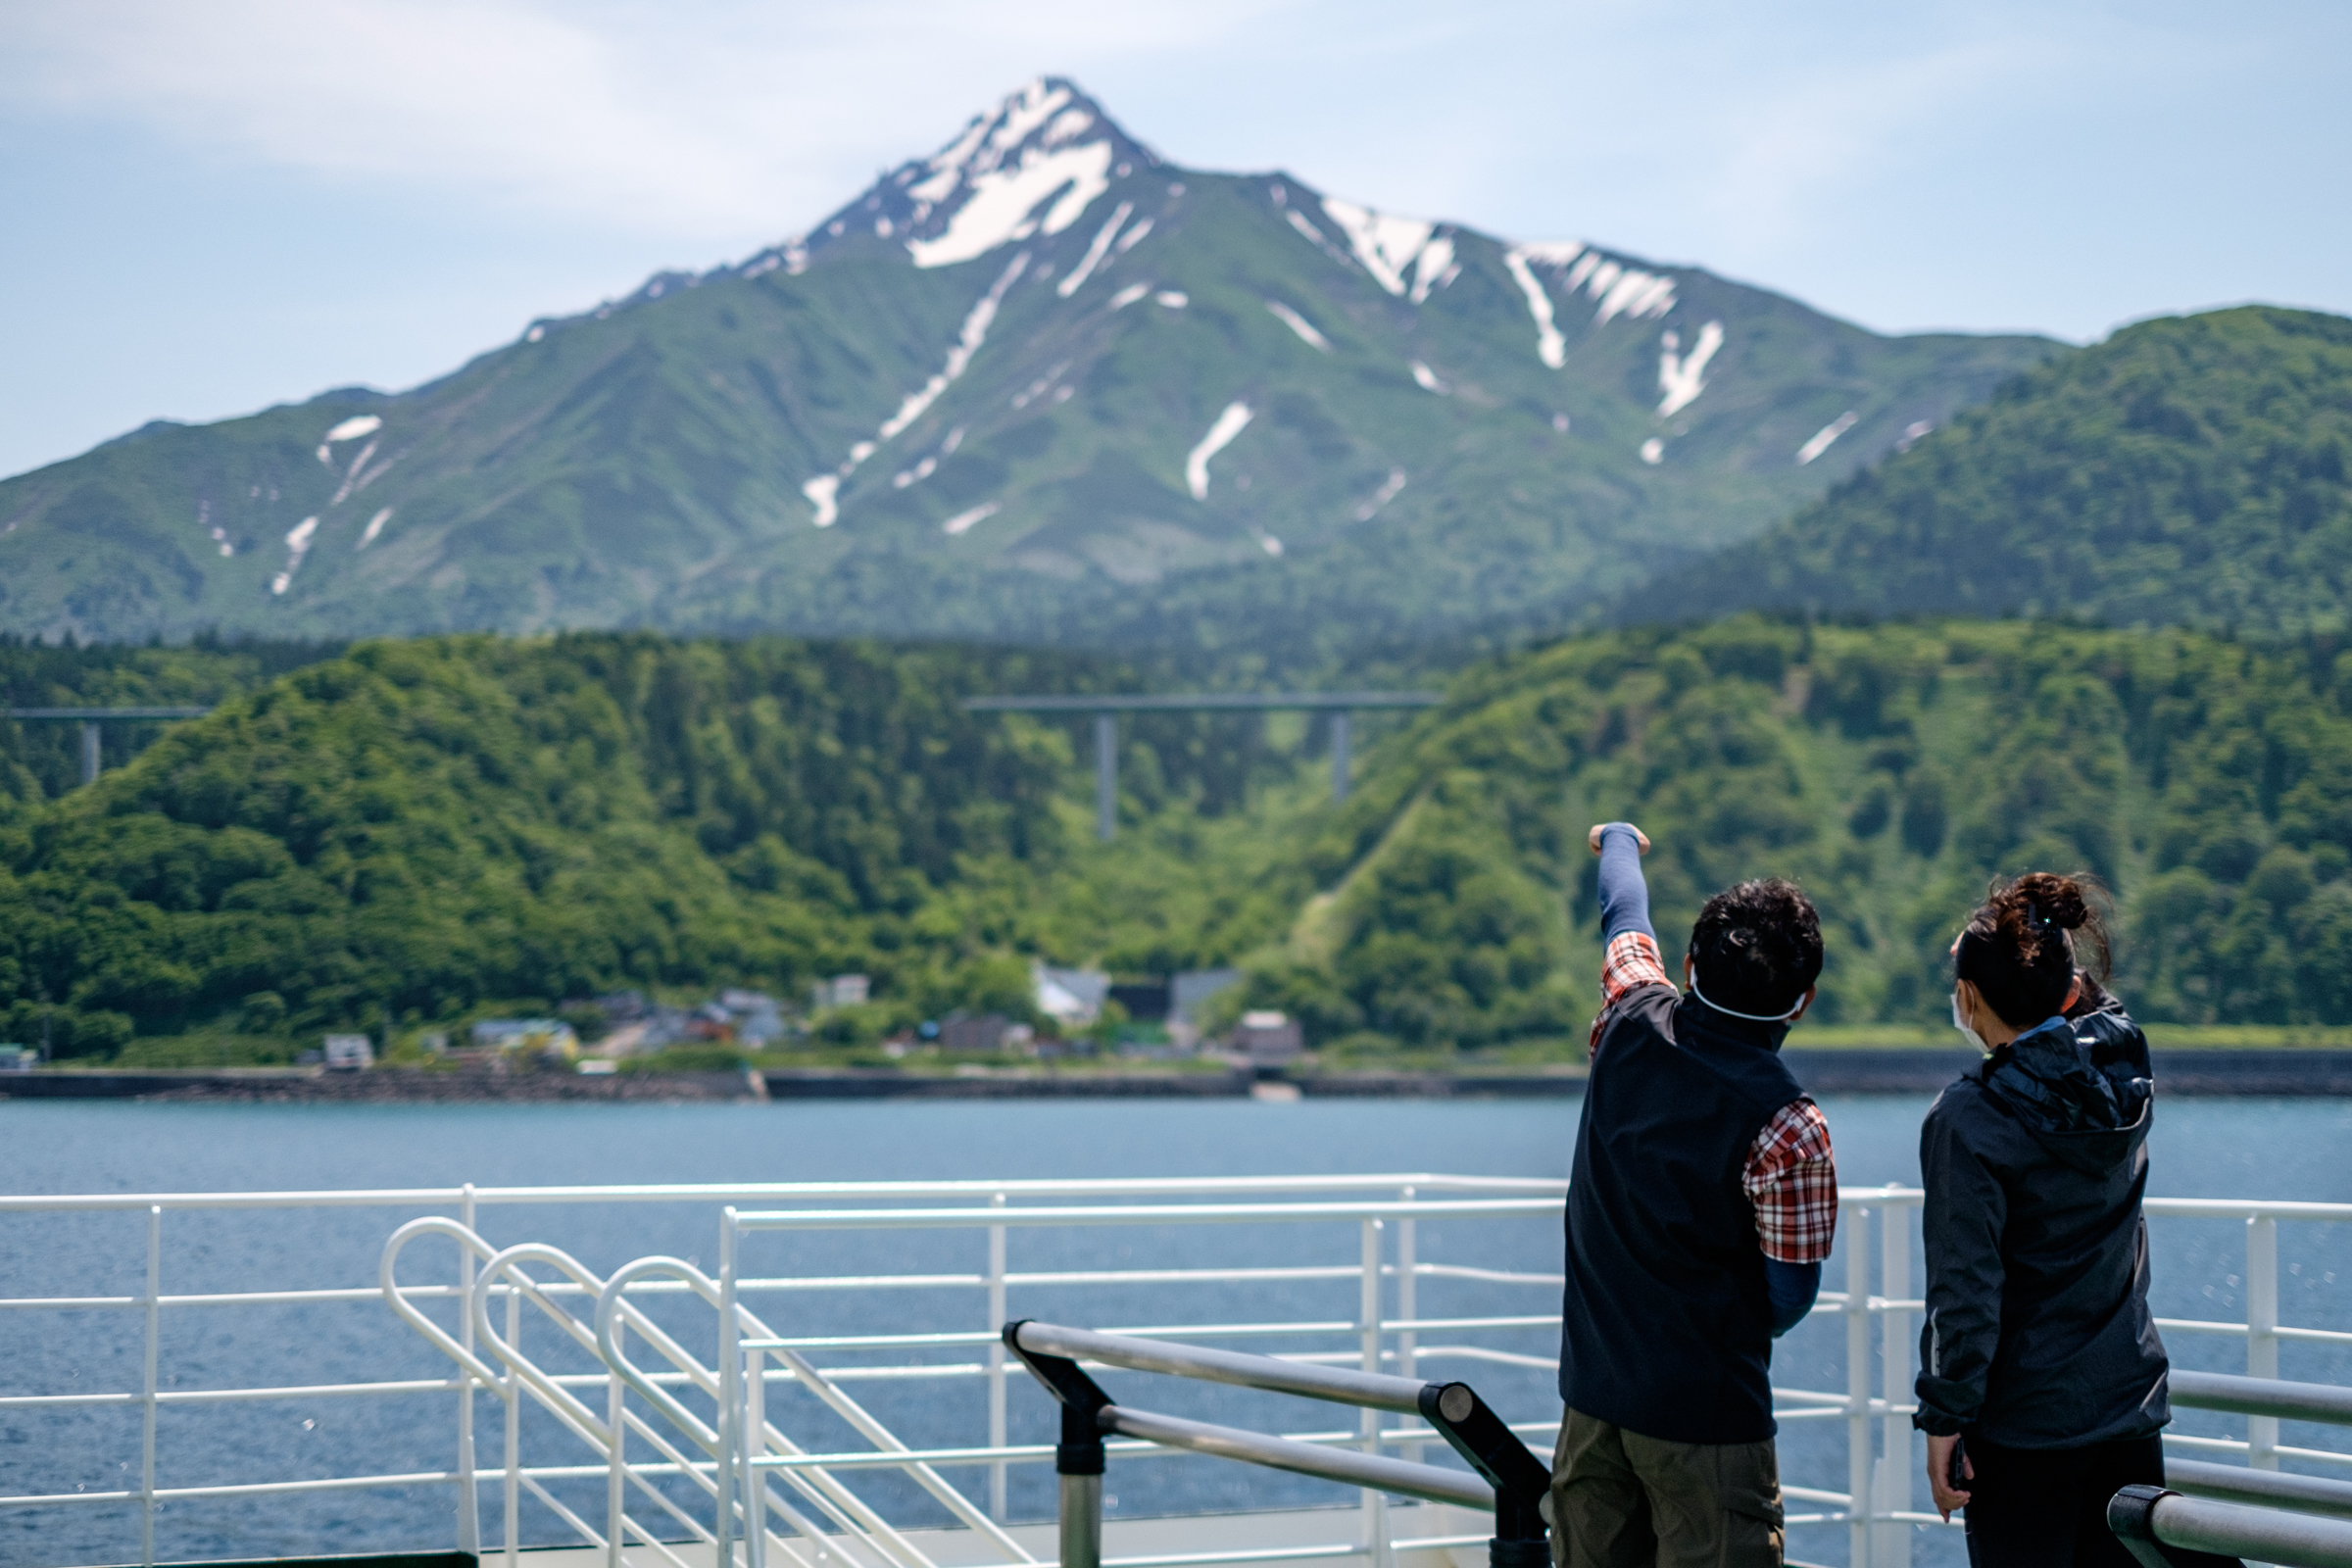 A nature guide points to the summit of Mt Rishiri, which still has a few remaining snow patches, from the ferry between Wakkanai and Rishiri.